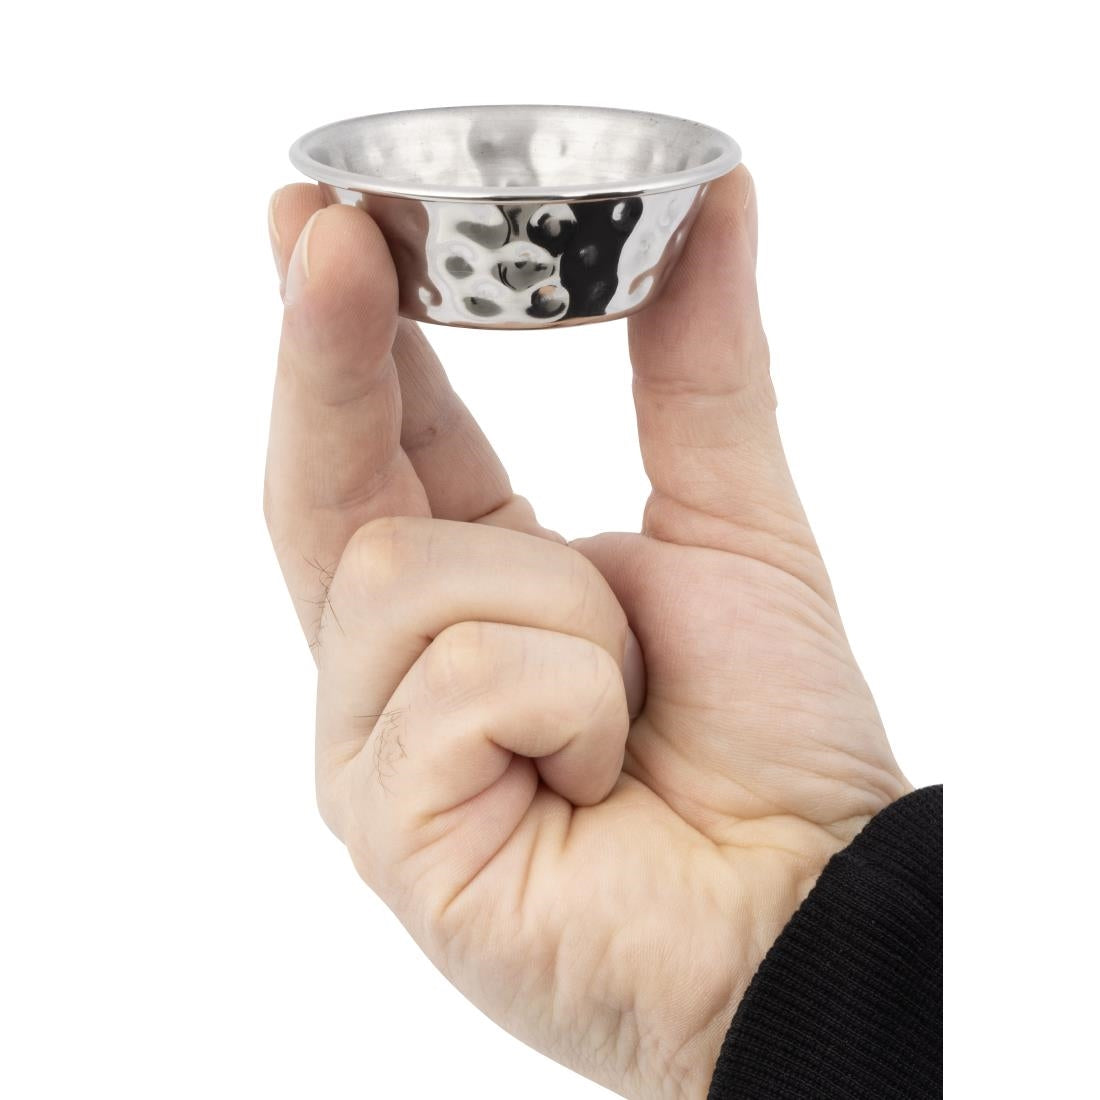 FU288 Olympia Hammered Stainless Steel Sauce Cups 45ml (Pack of 12)